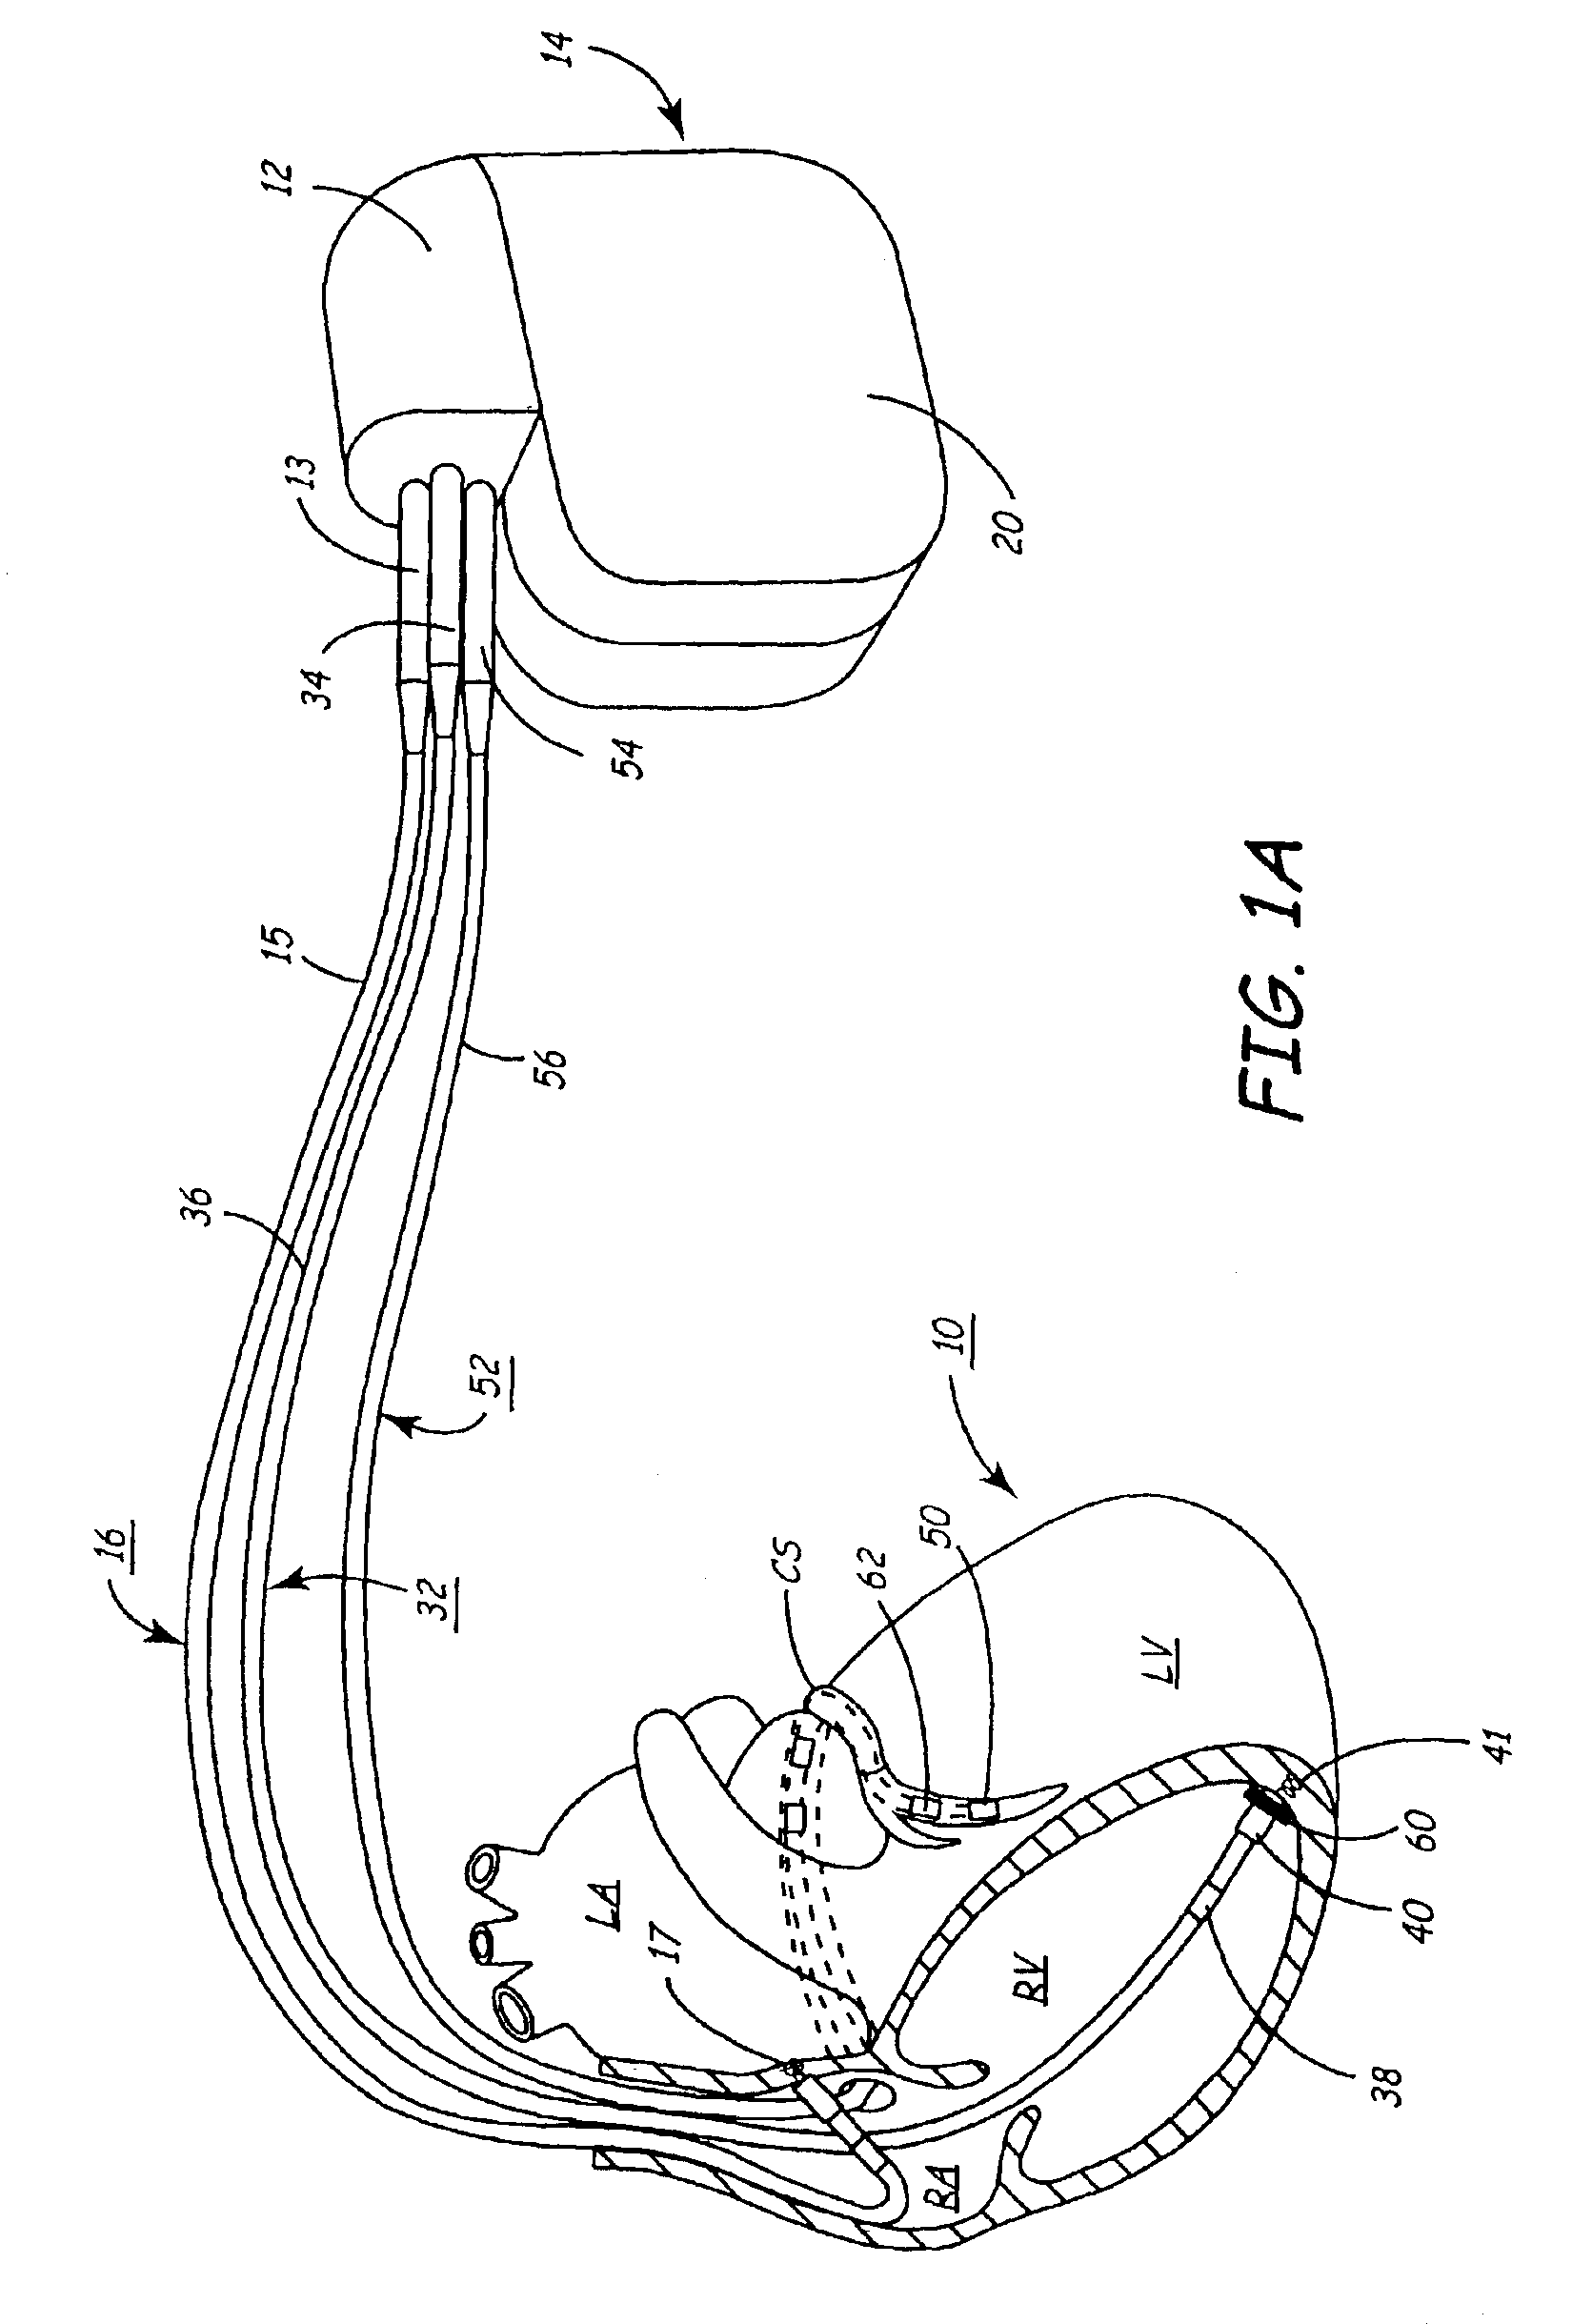 Method and apparatus for optimizing cardiac resynchronization therapy based on left ventricular acceleration